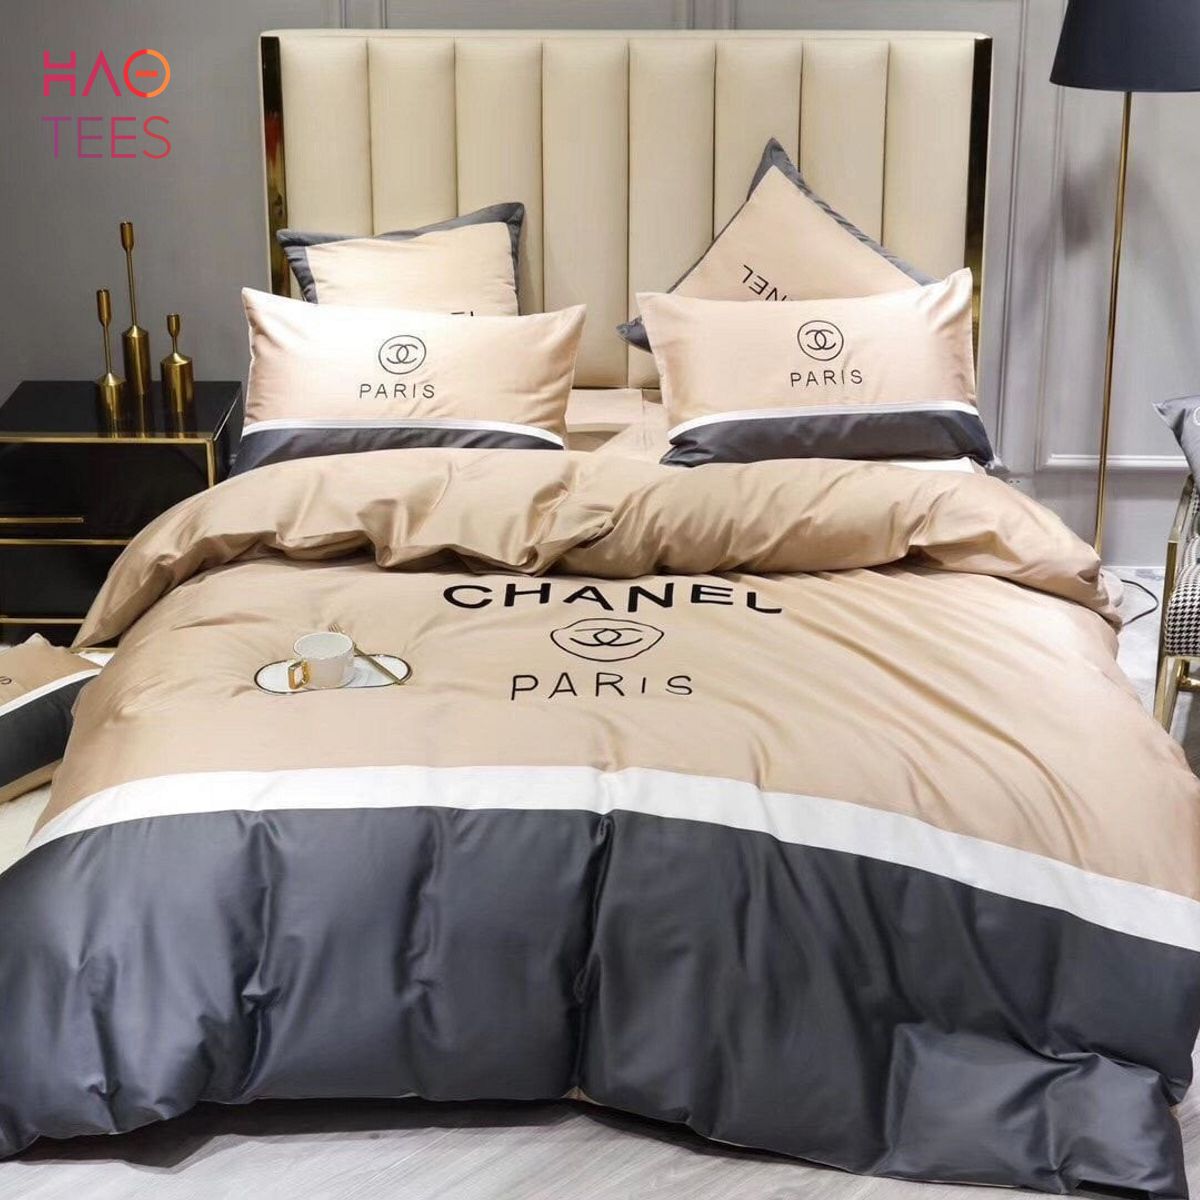 6 Piece Chanel Bedding!! Double R350.00 - KAL Online Store